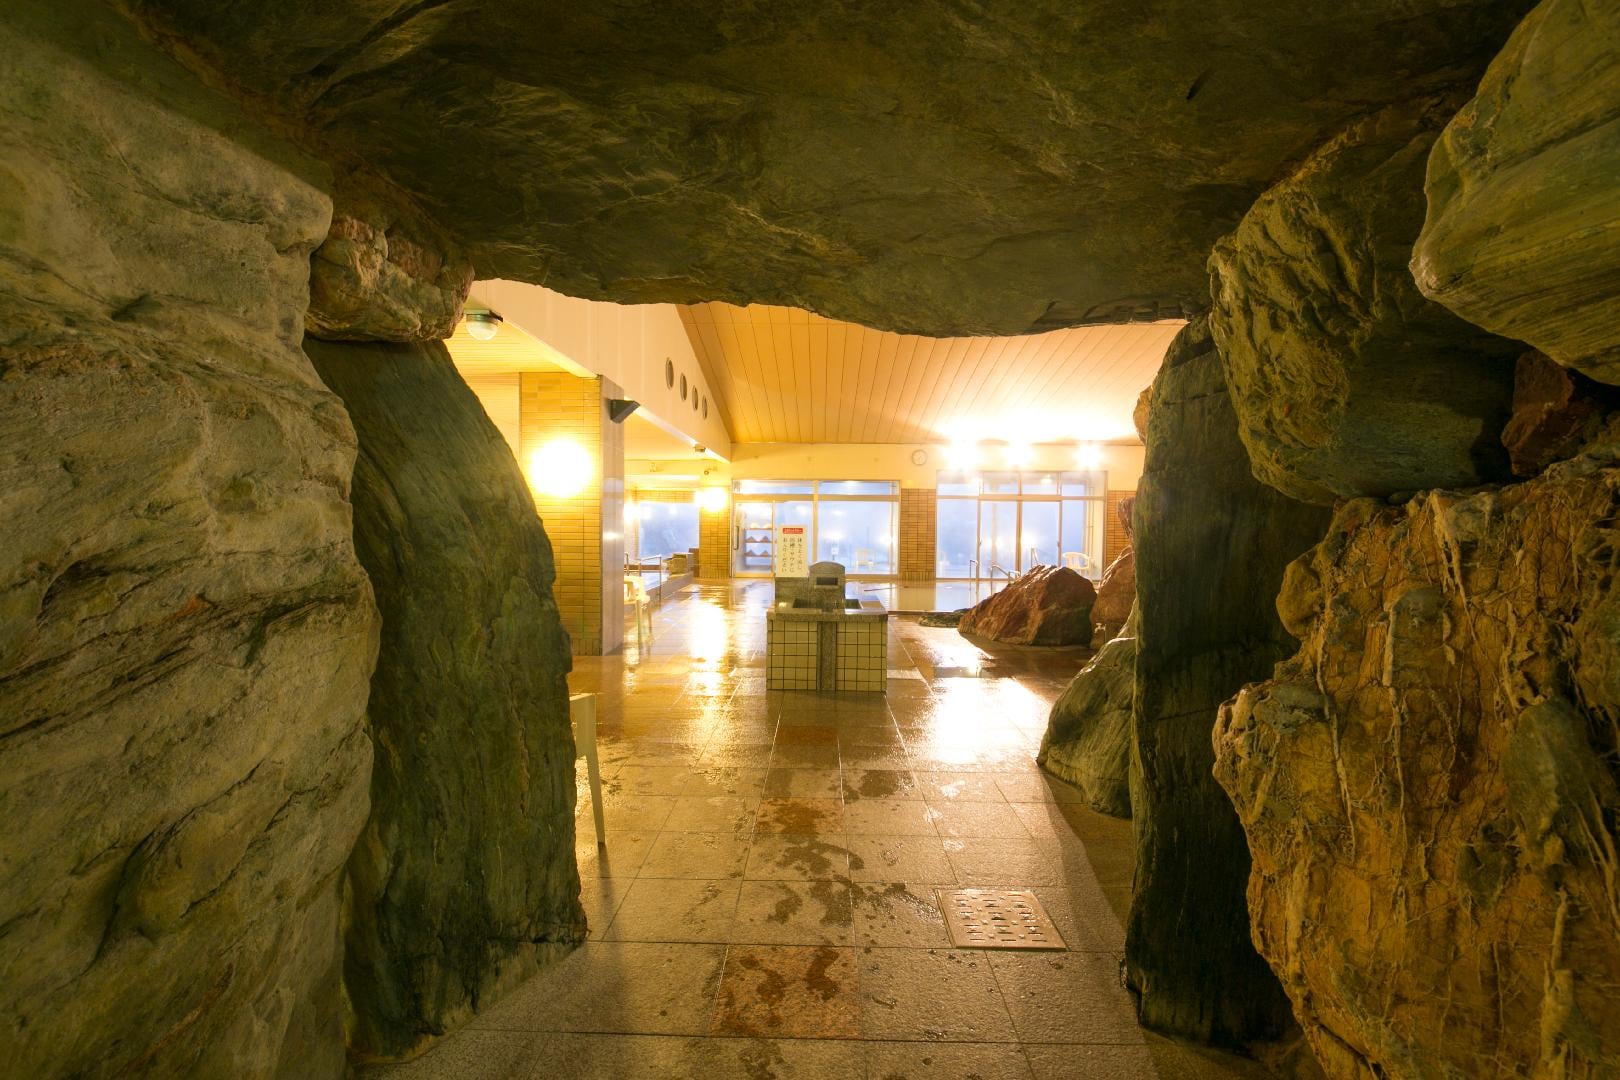 Once you pass through the cave, you'll be right there to the proud public bath!